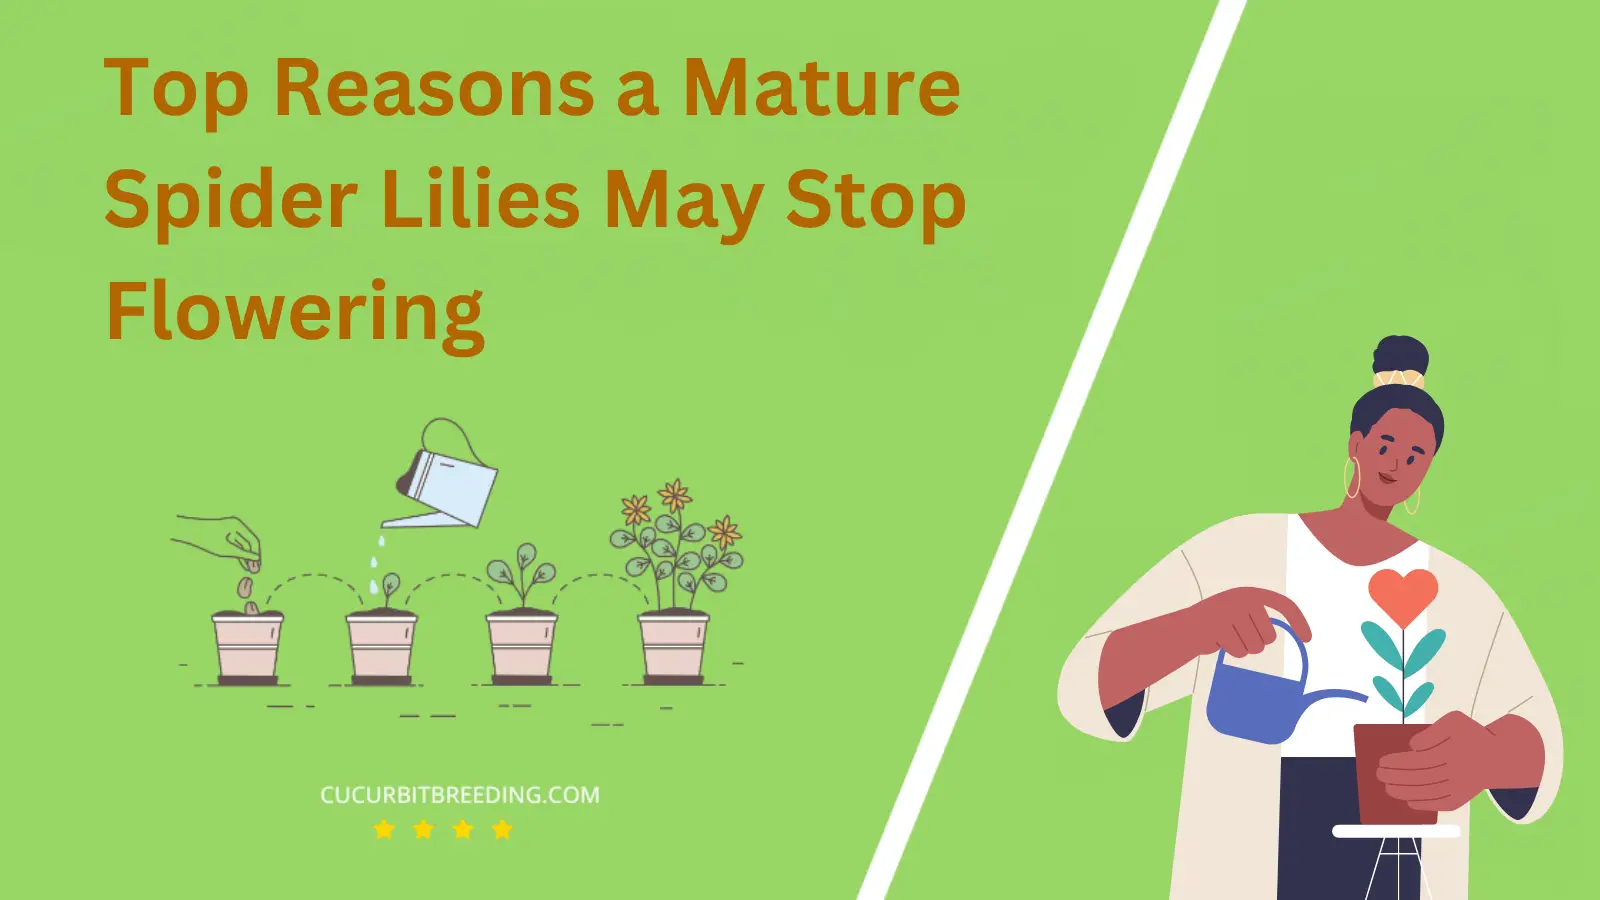 Top Reasons a Mature Spider Lilies May Stop Flowering